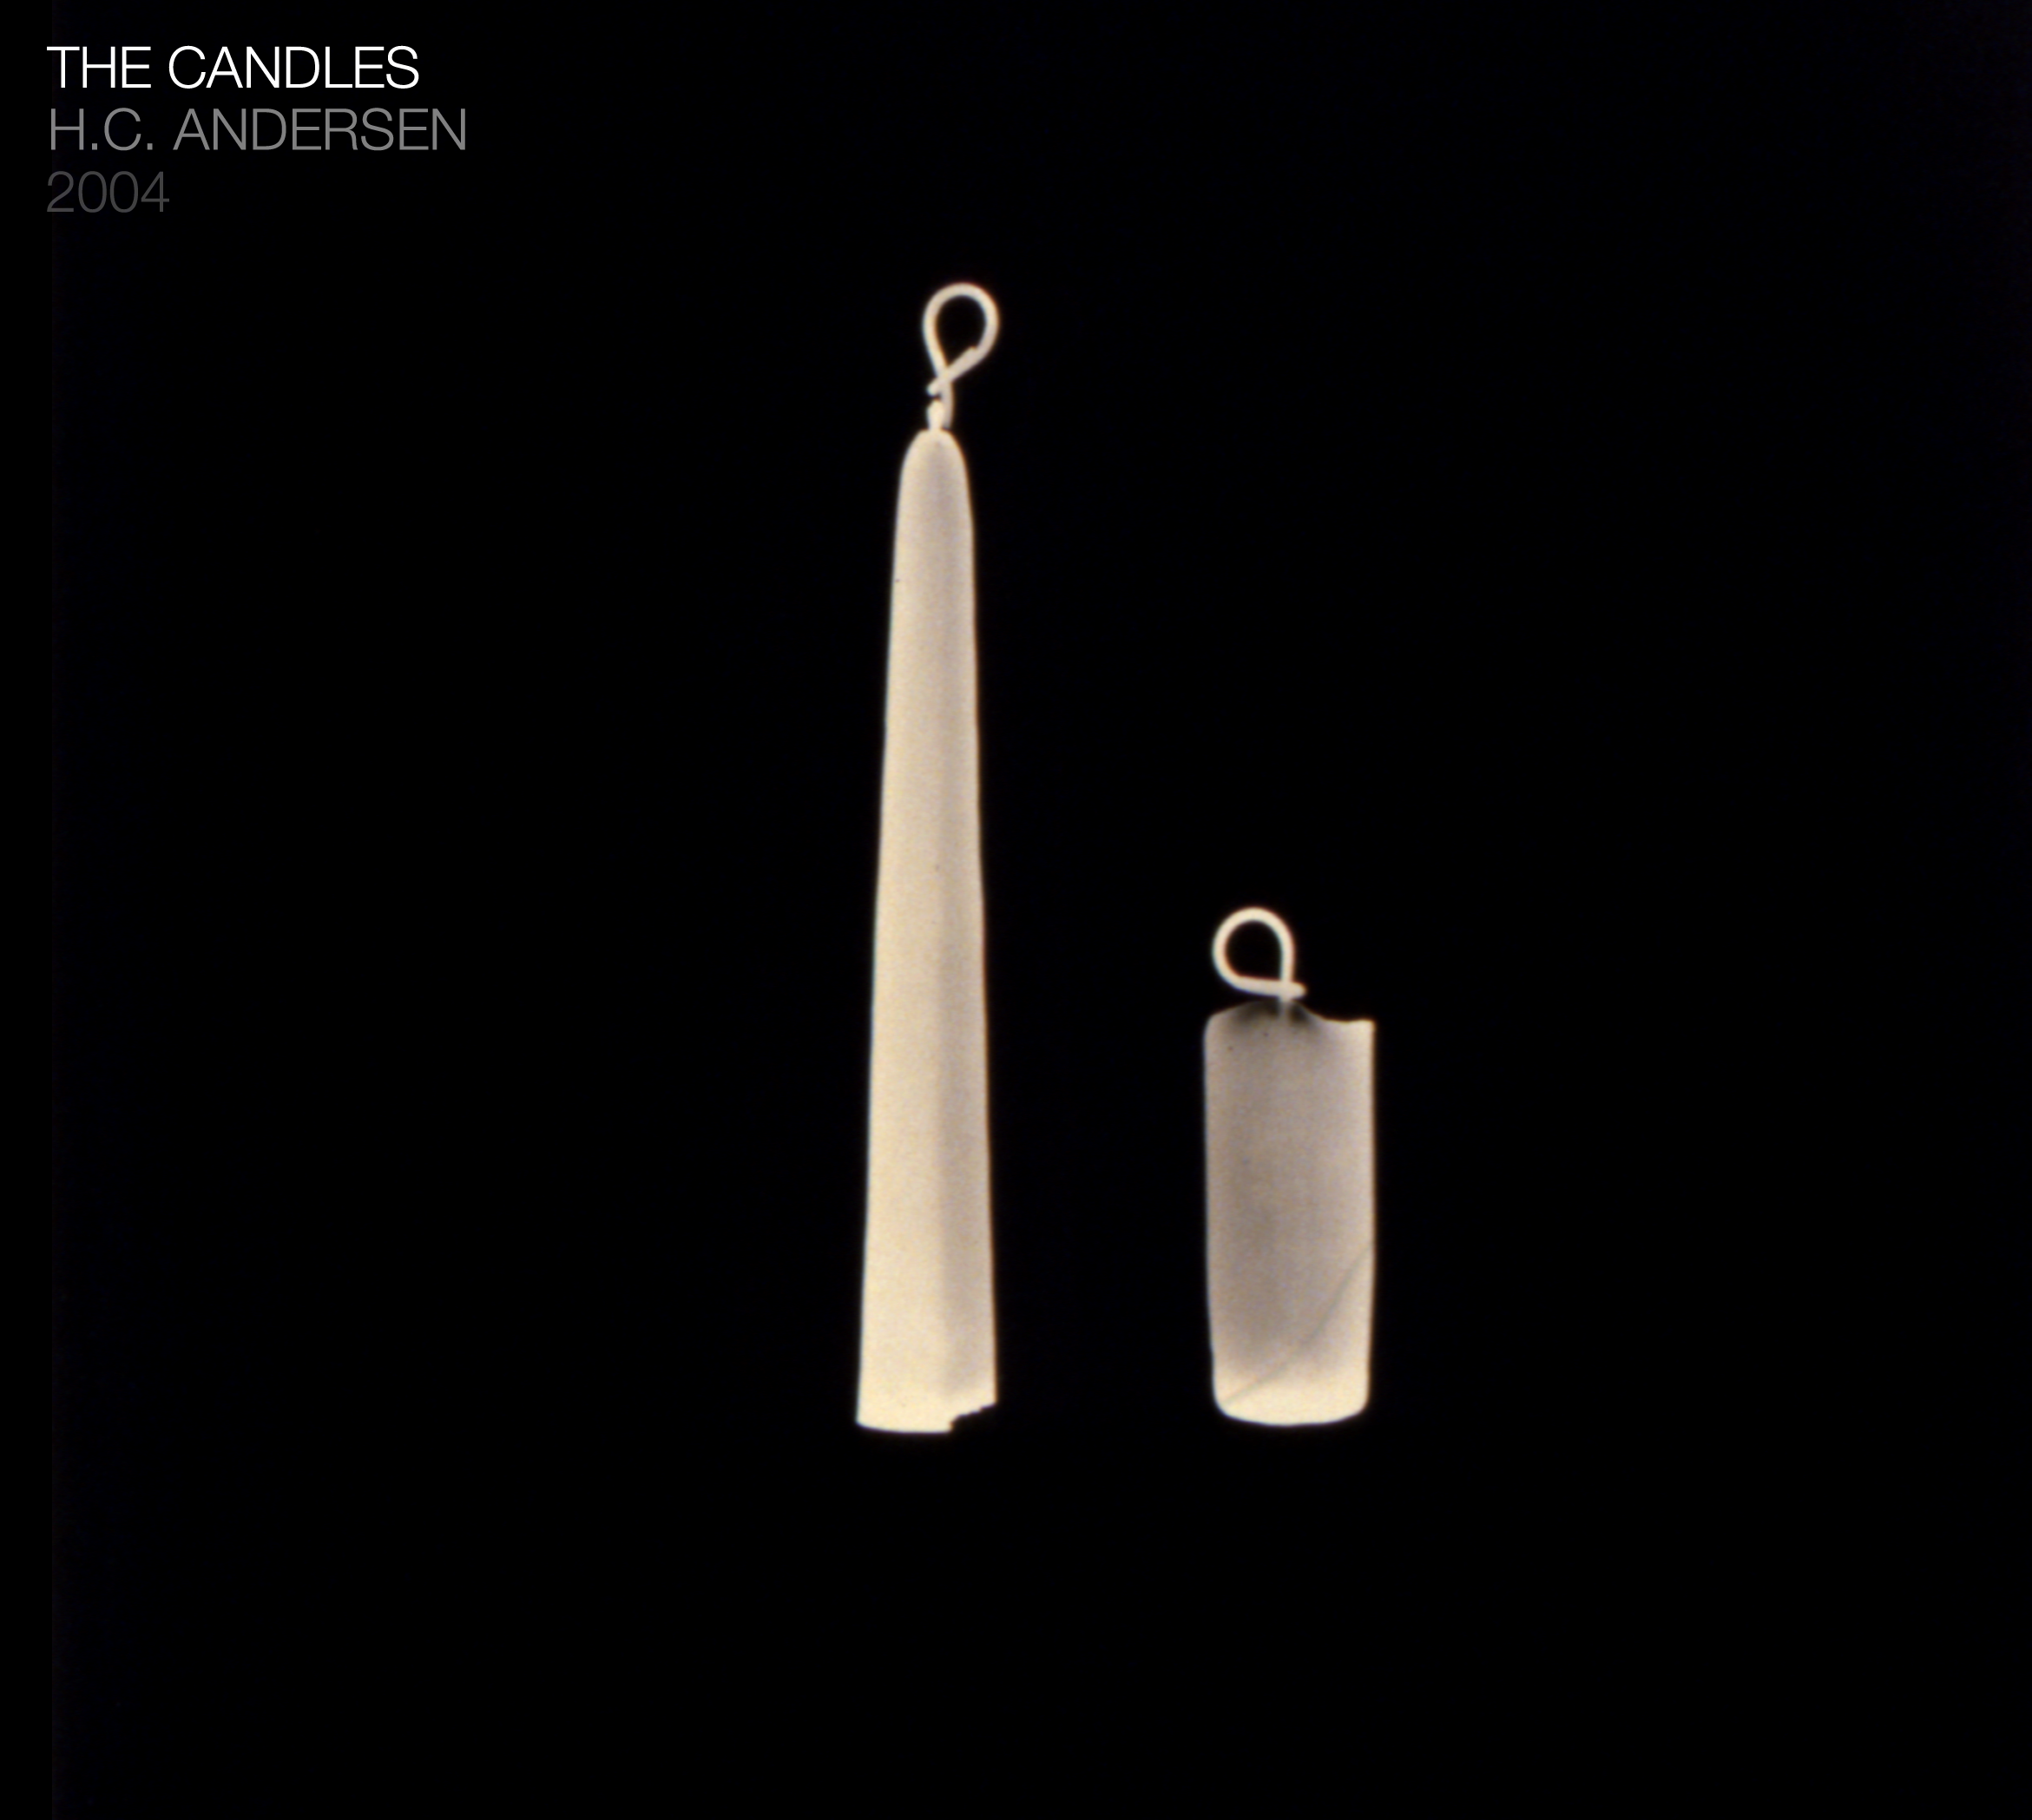 The Candles